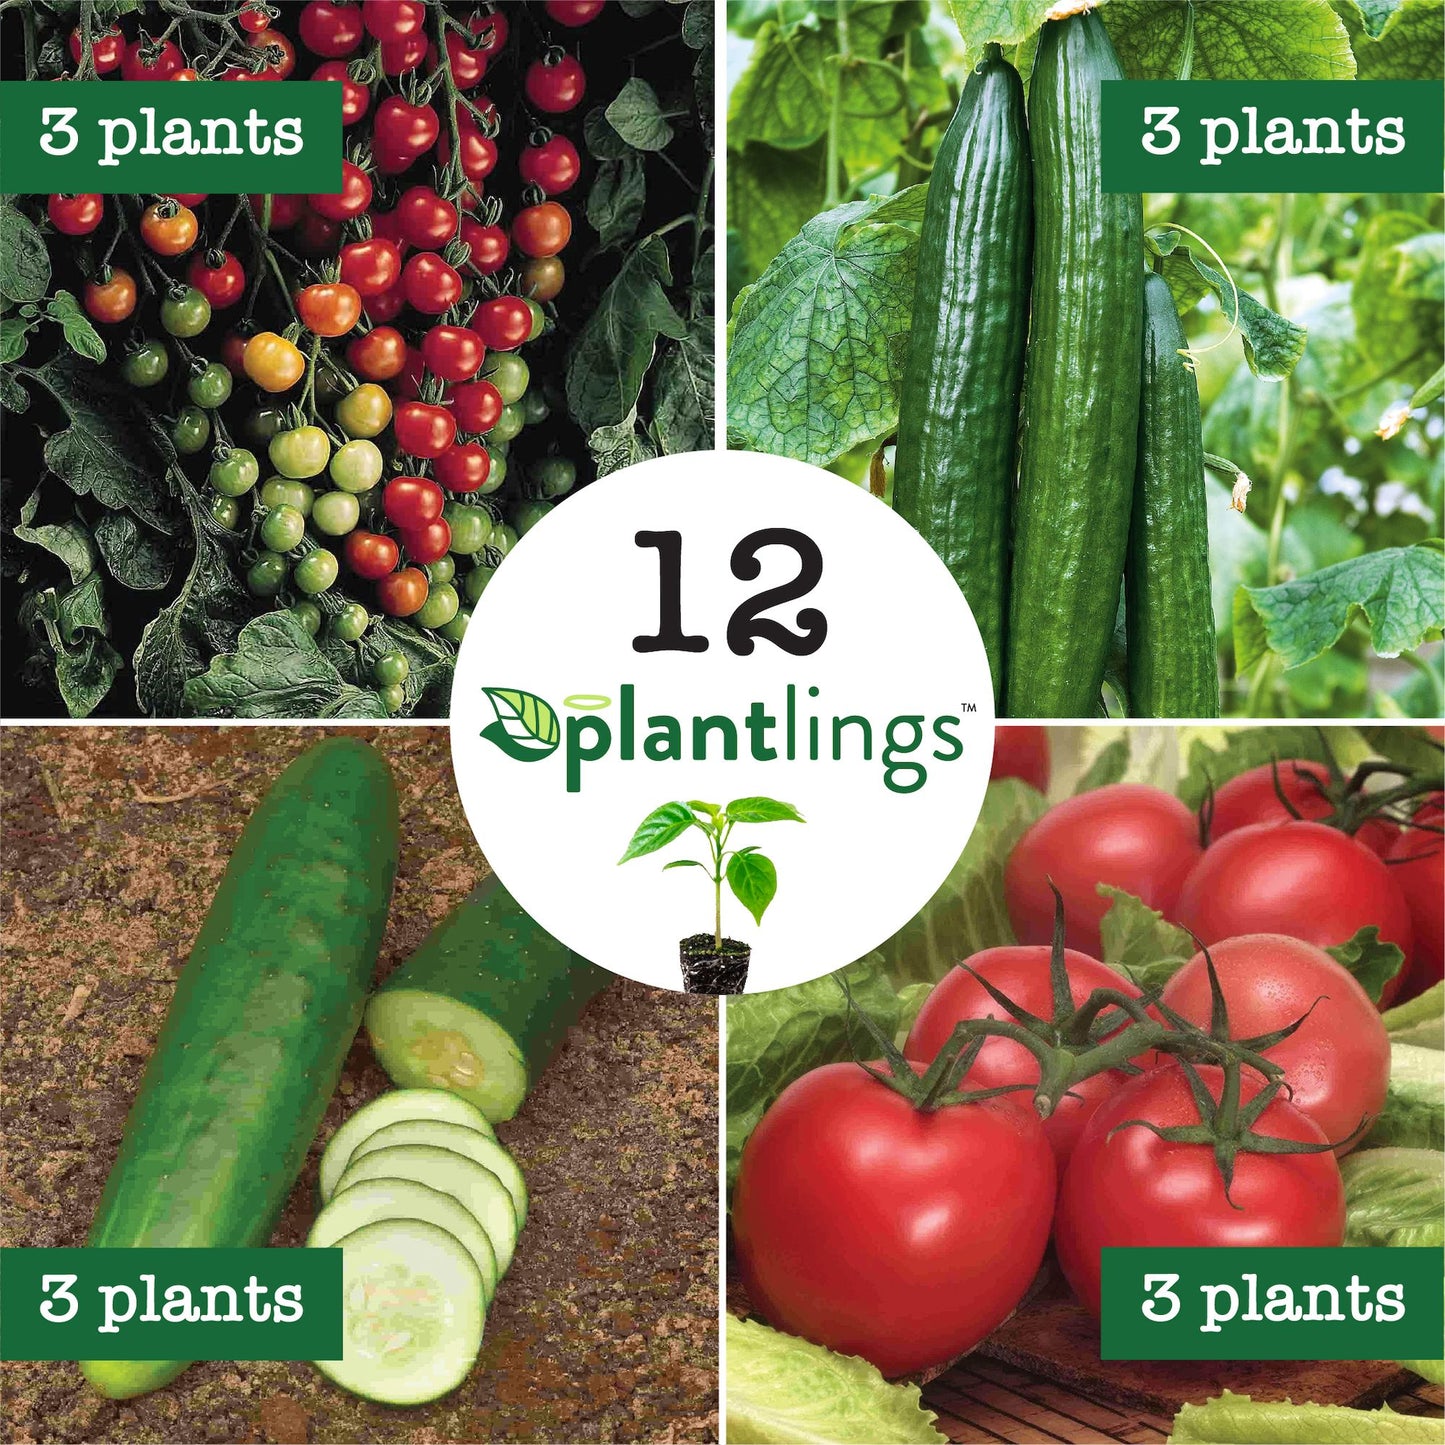 Cucumber & Tomato Plantlings Kit Live Baby Plants 1-3in., 12-Pack